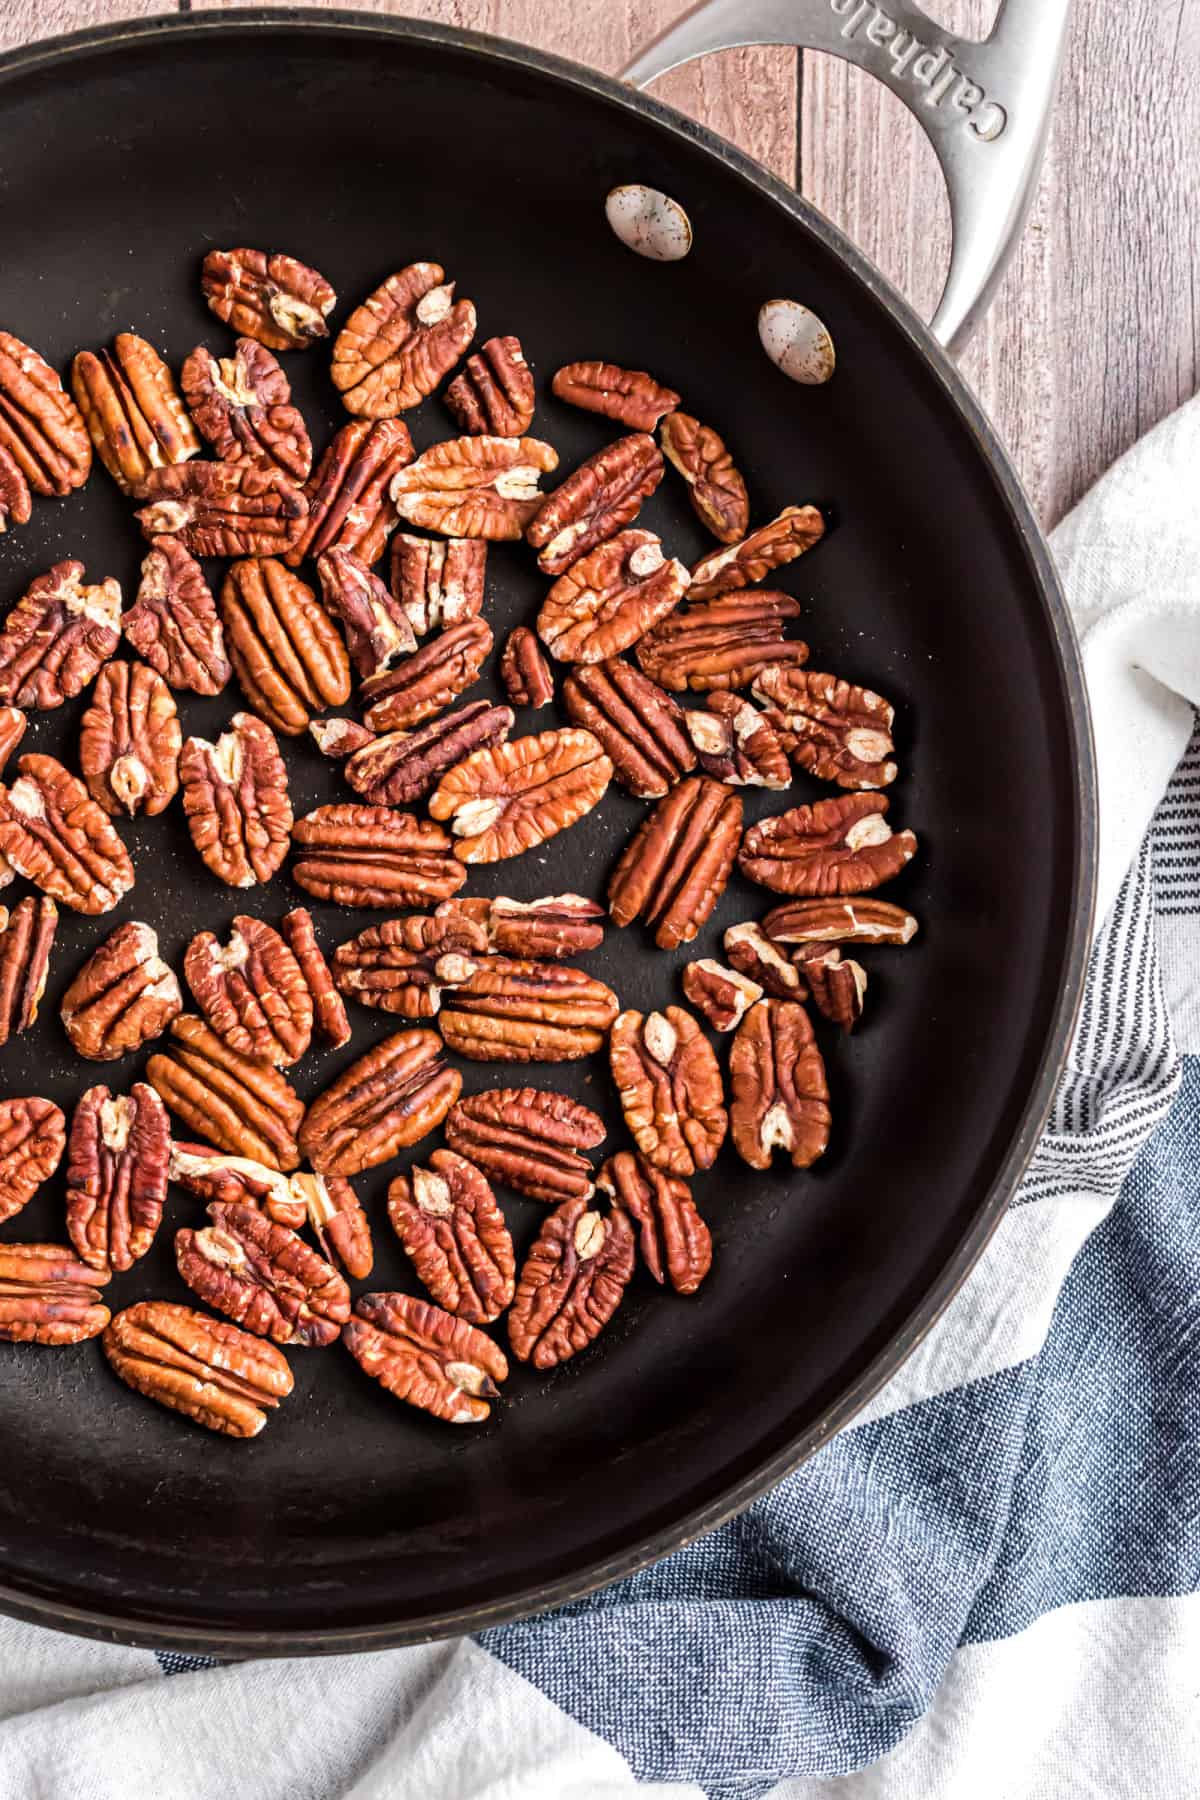 Pecans in a black skillet for toasting.